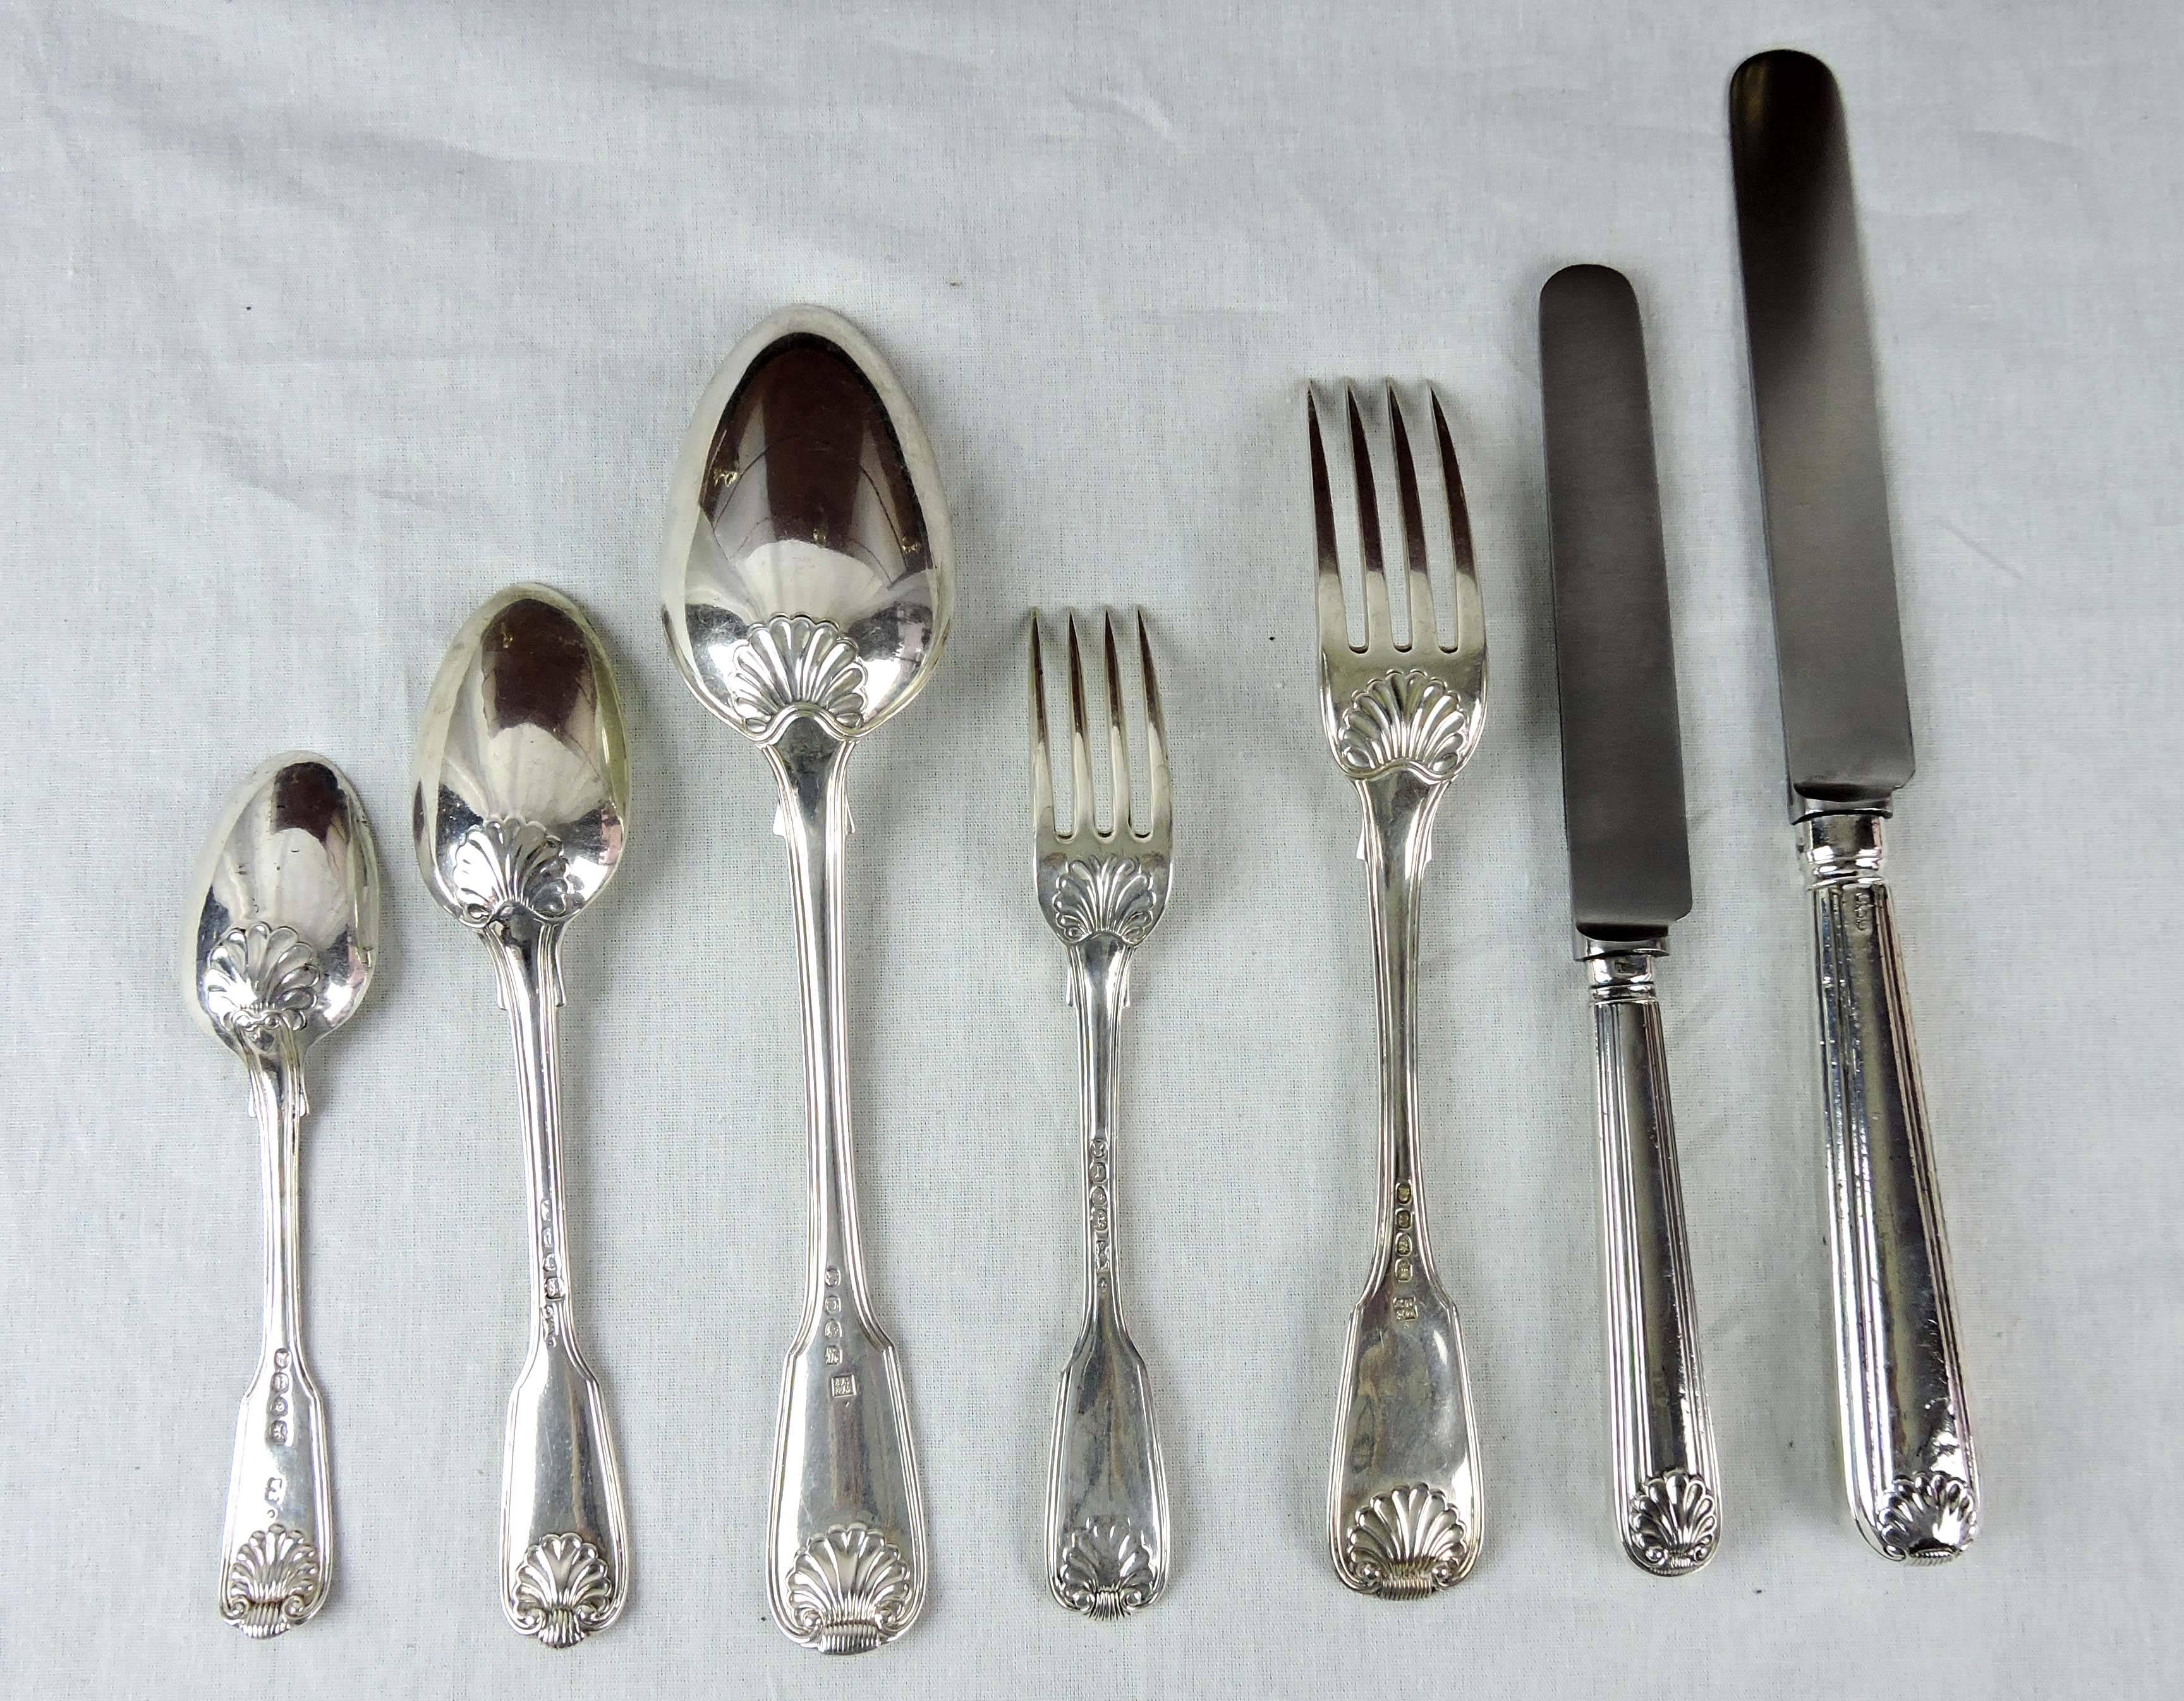 Georian Period Fiddle, Thread & Shell Sterling Silver Flatware Dinner Set for 12 For Sale 3